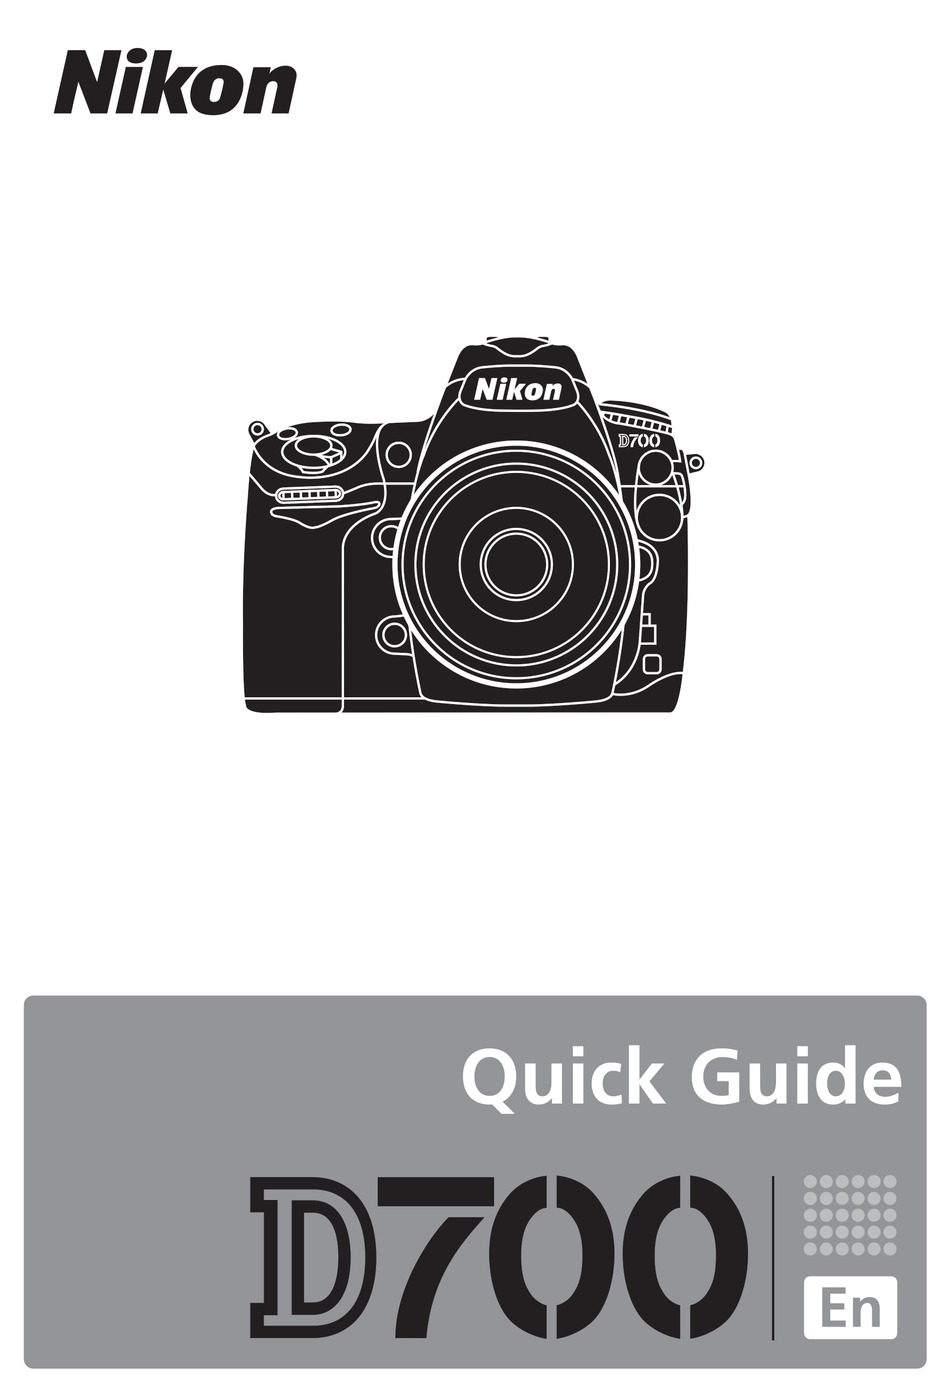 NIKON D700 CAMERA FULLY PRINTED USER GUIDE INSTRUCTION MANUAL  472 PAGES 